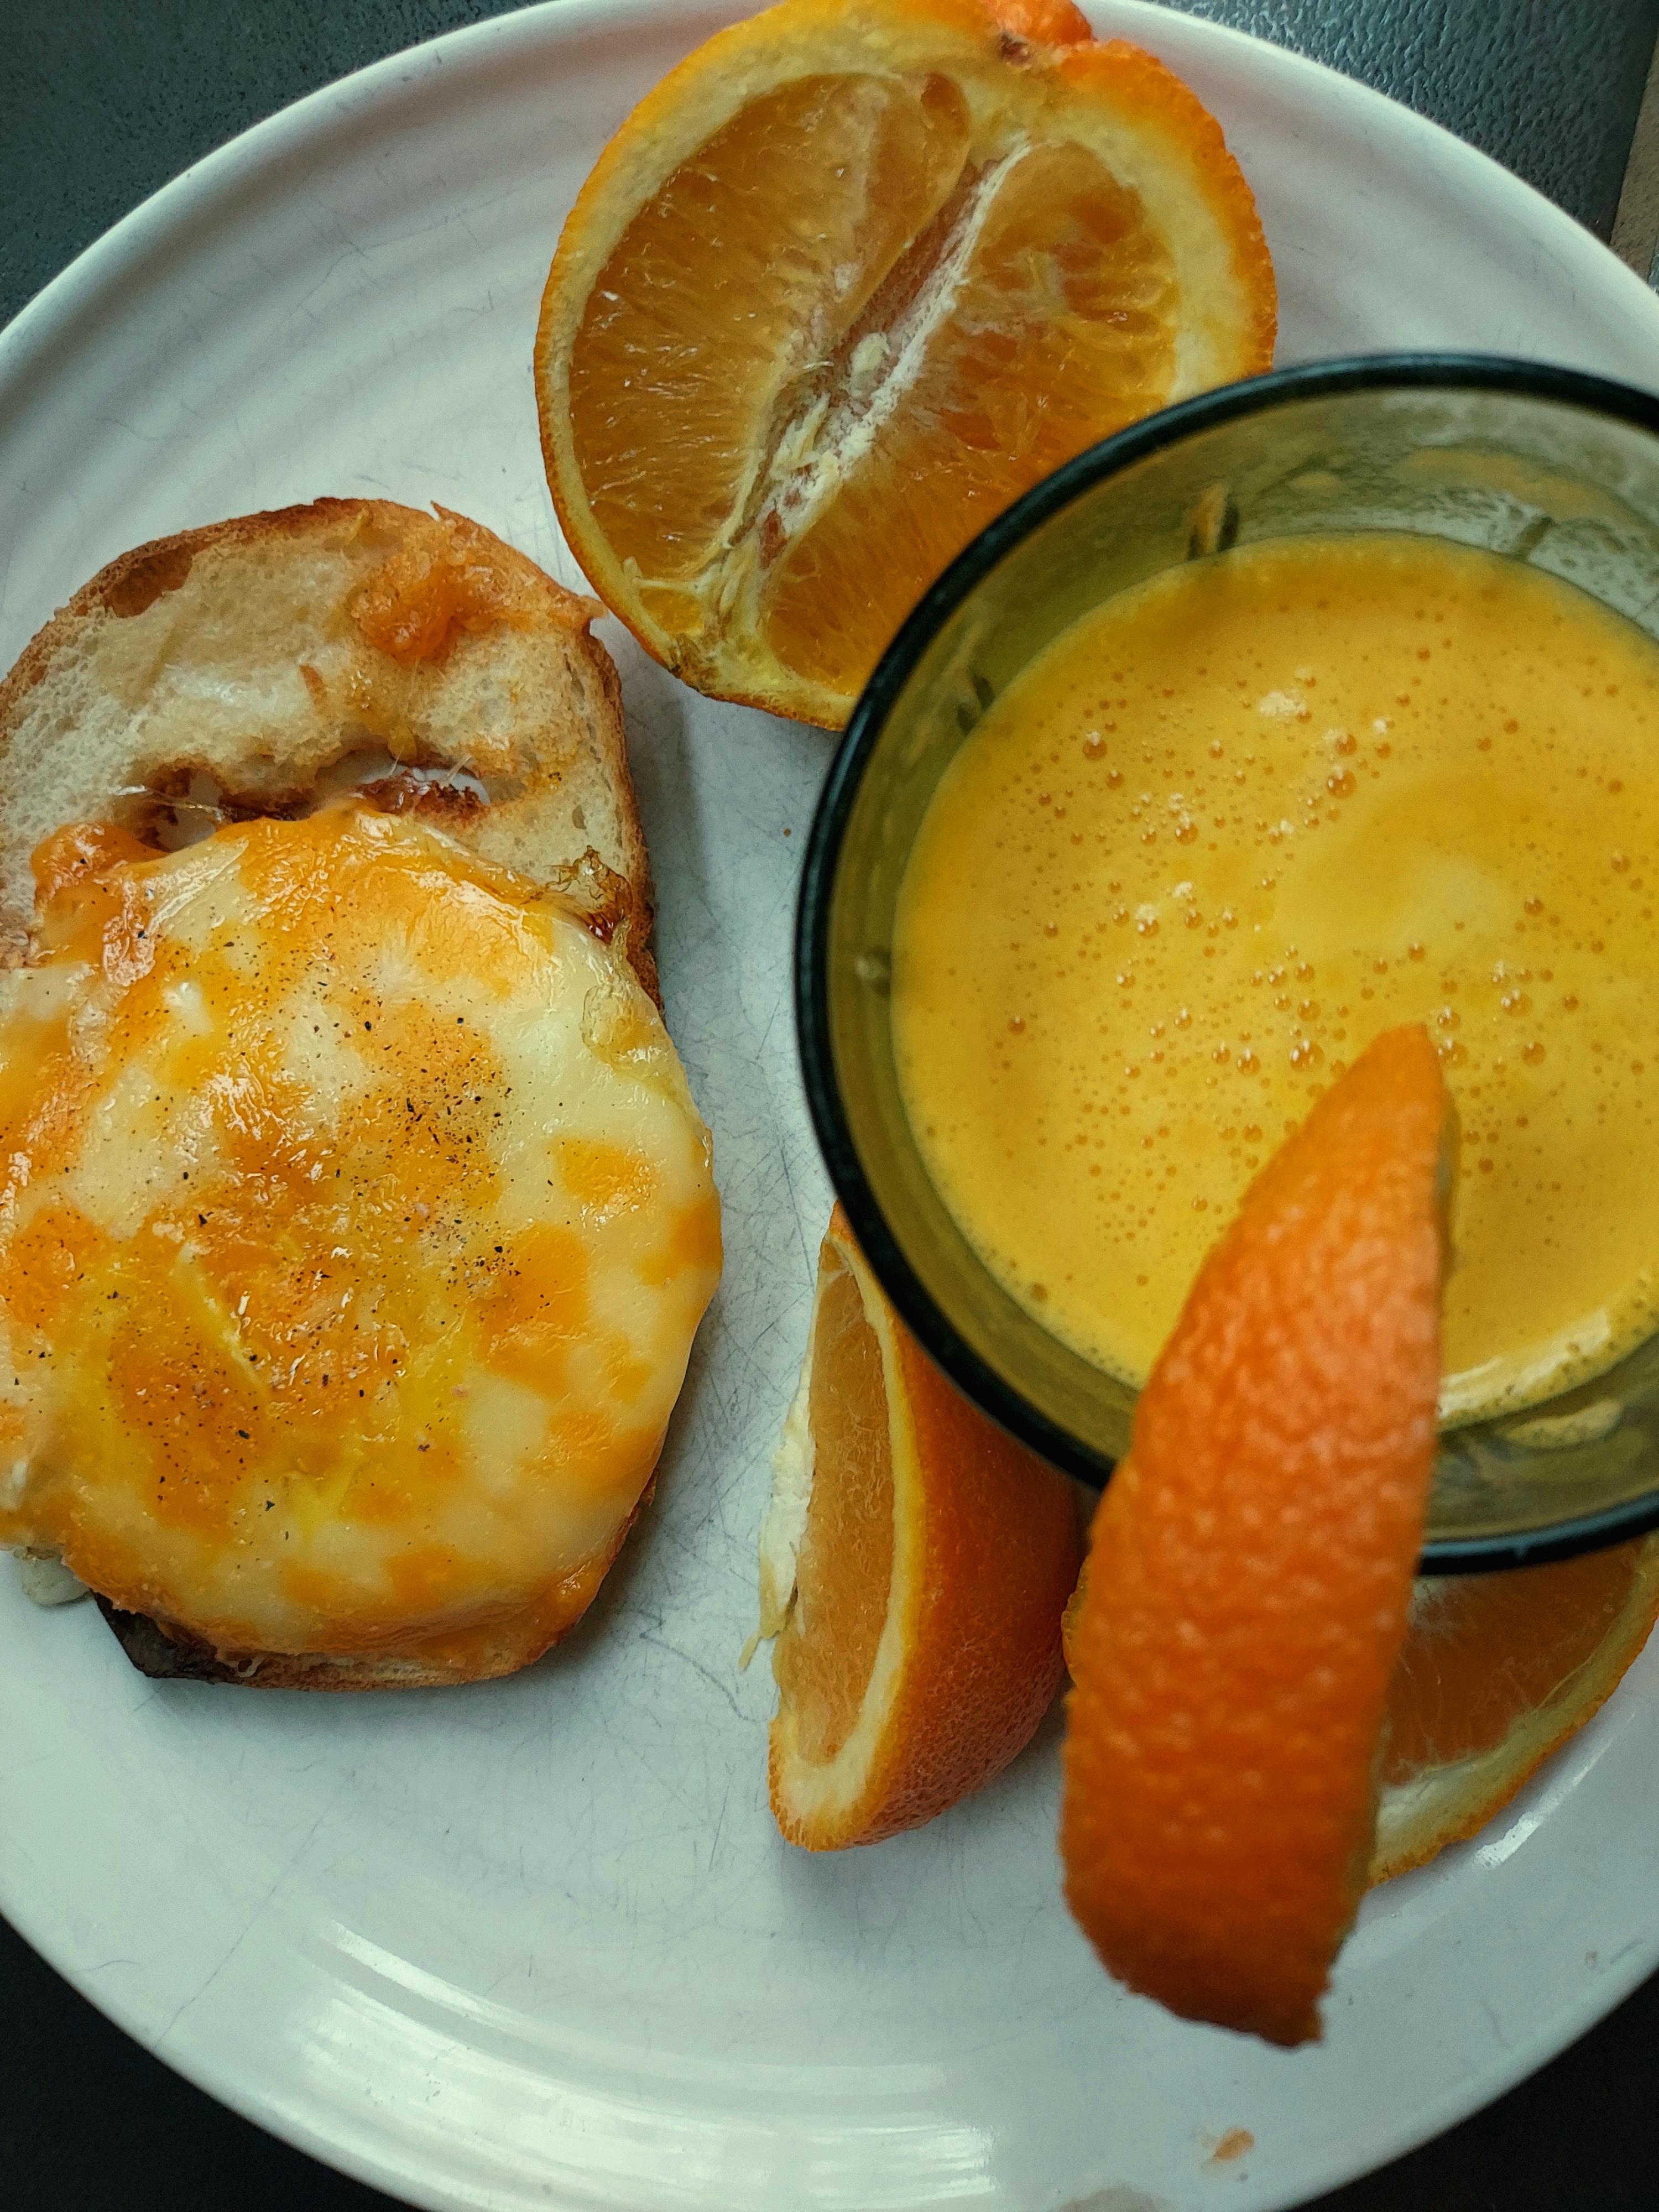 Over-Easy Egg Sandwich With Fresh Squeezed Orange Juice